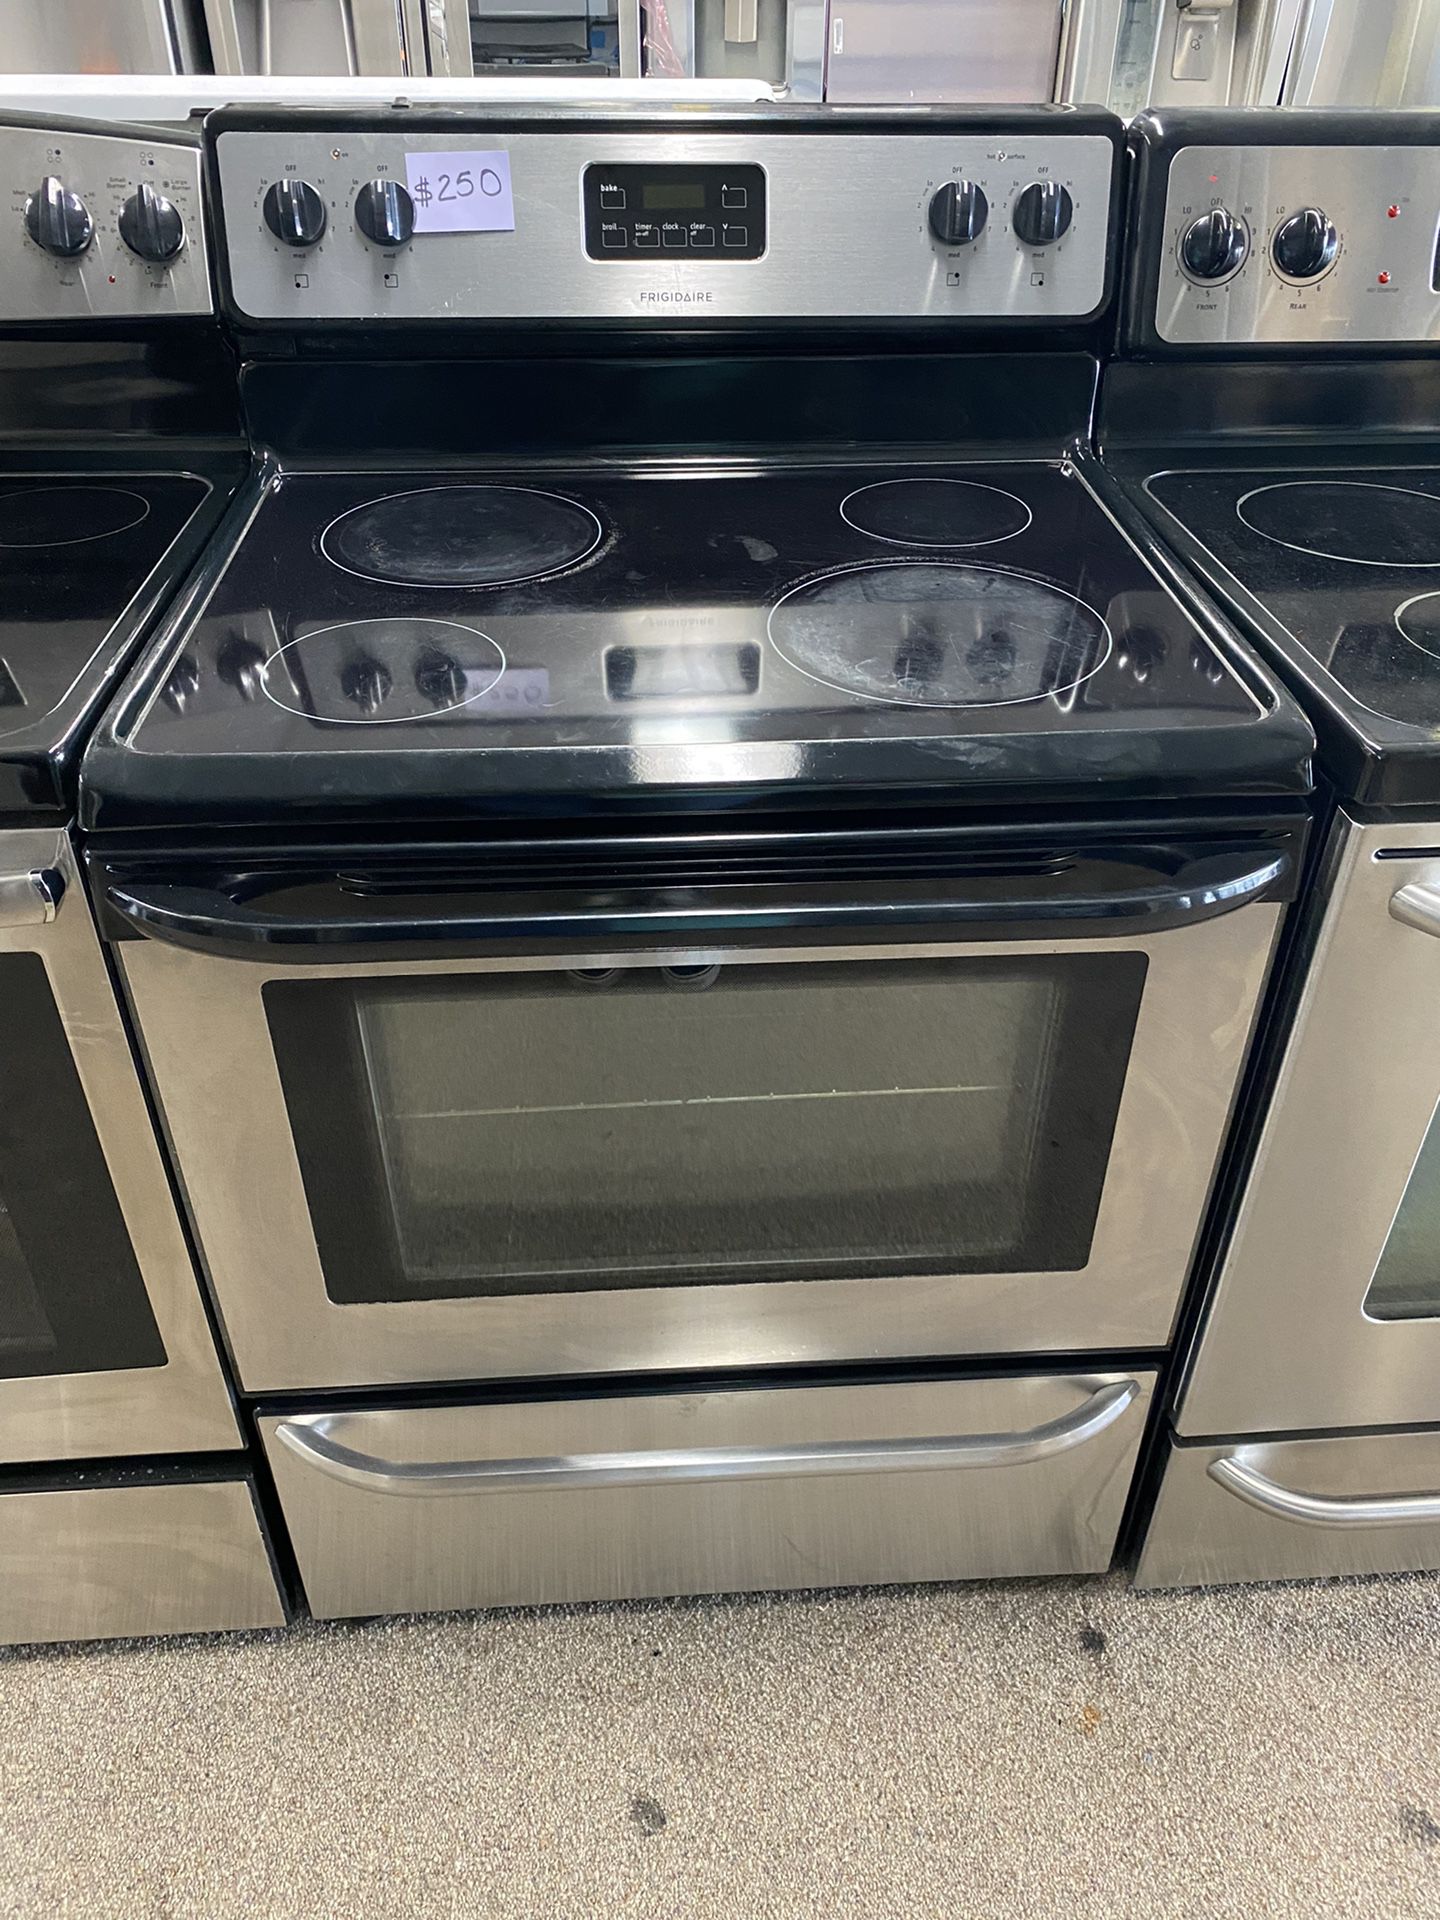 Frigidaire Stainless Steel Electric Stove Used Excellent Working Conditions 